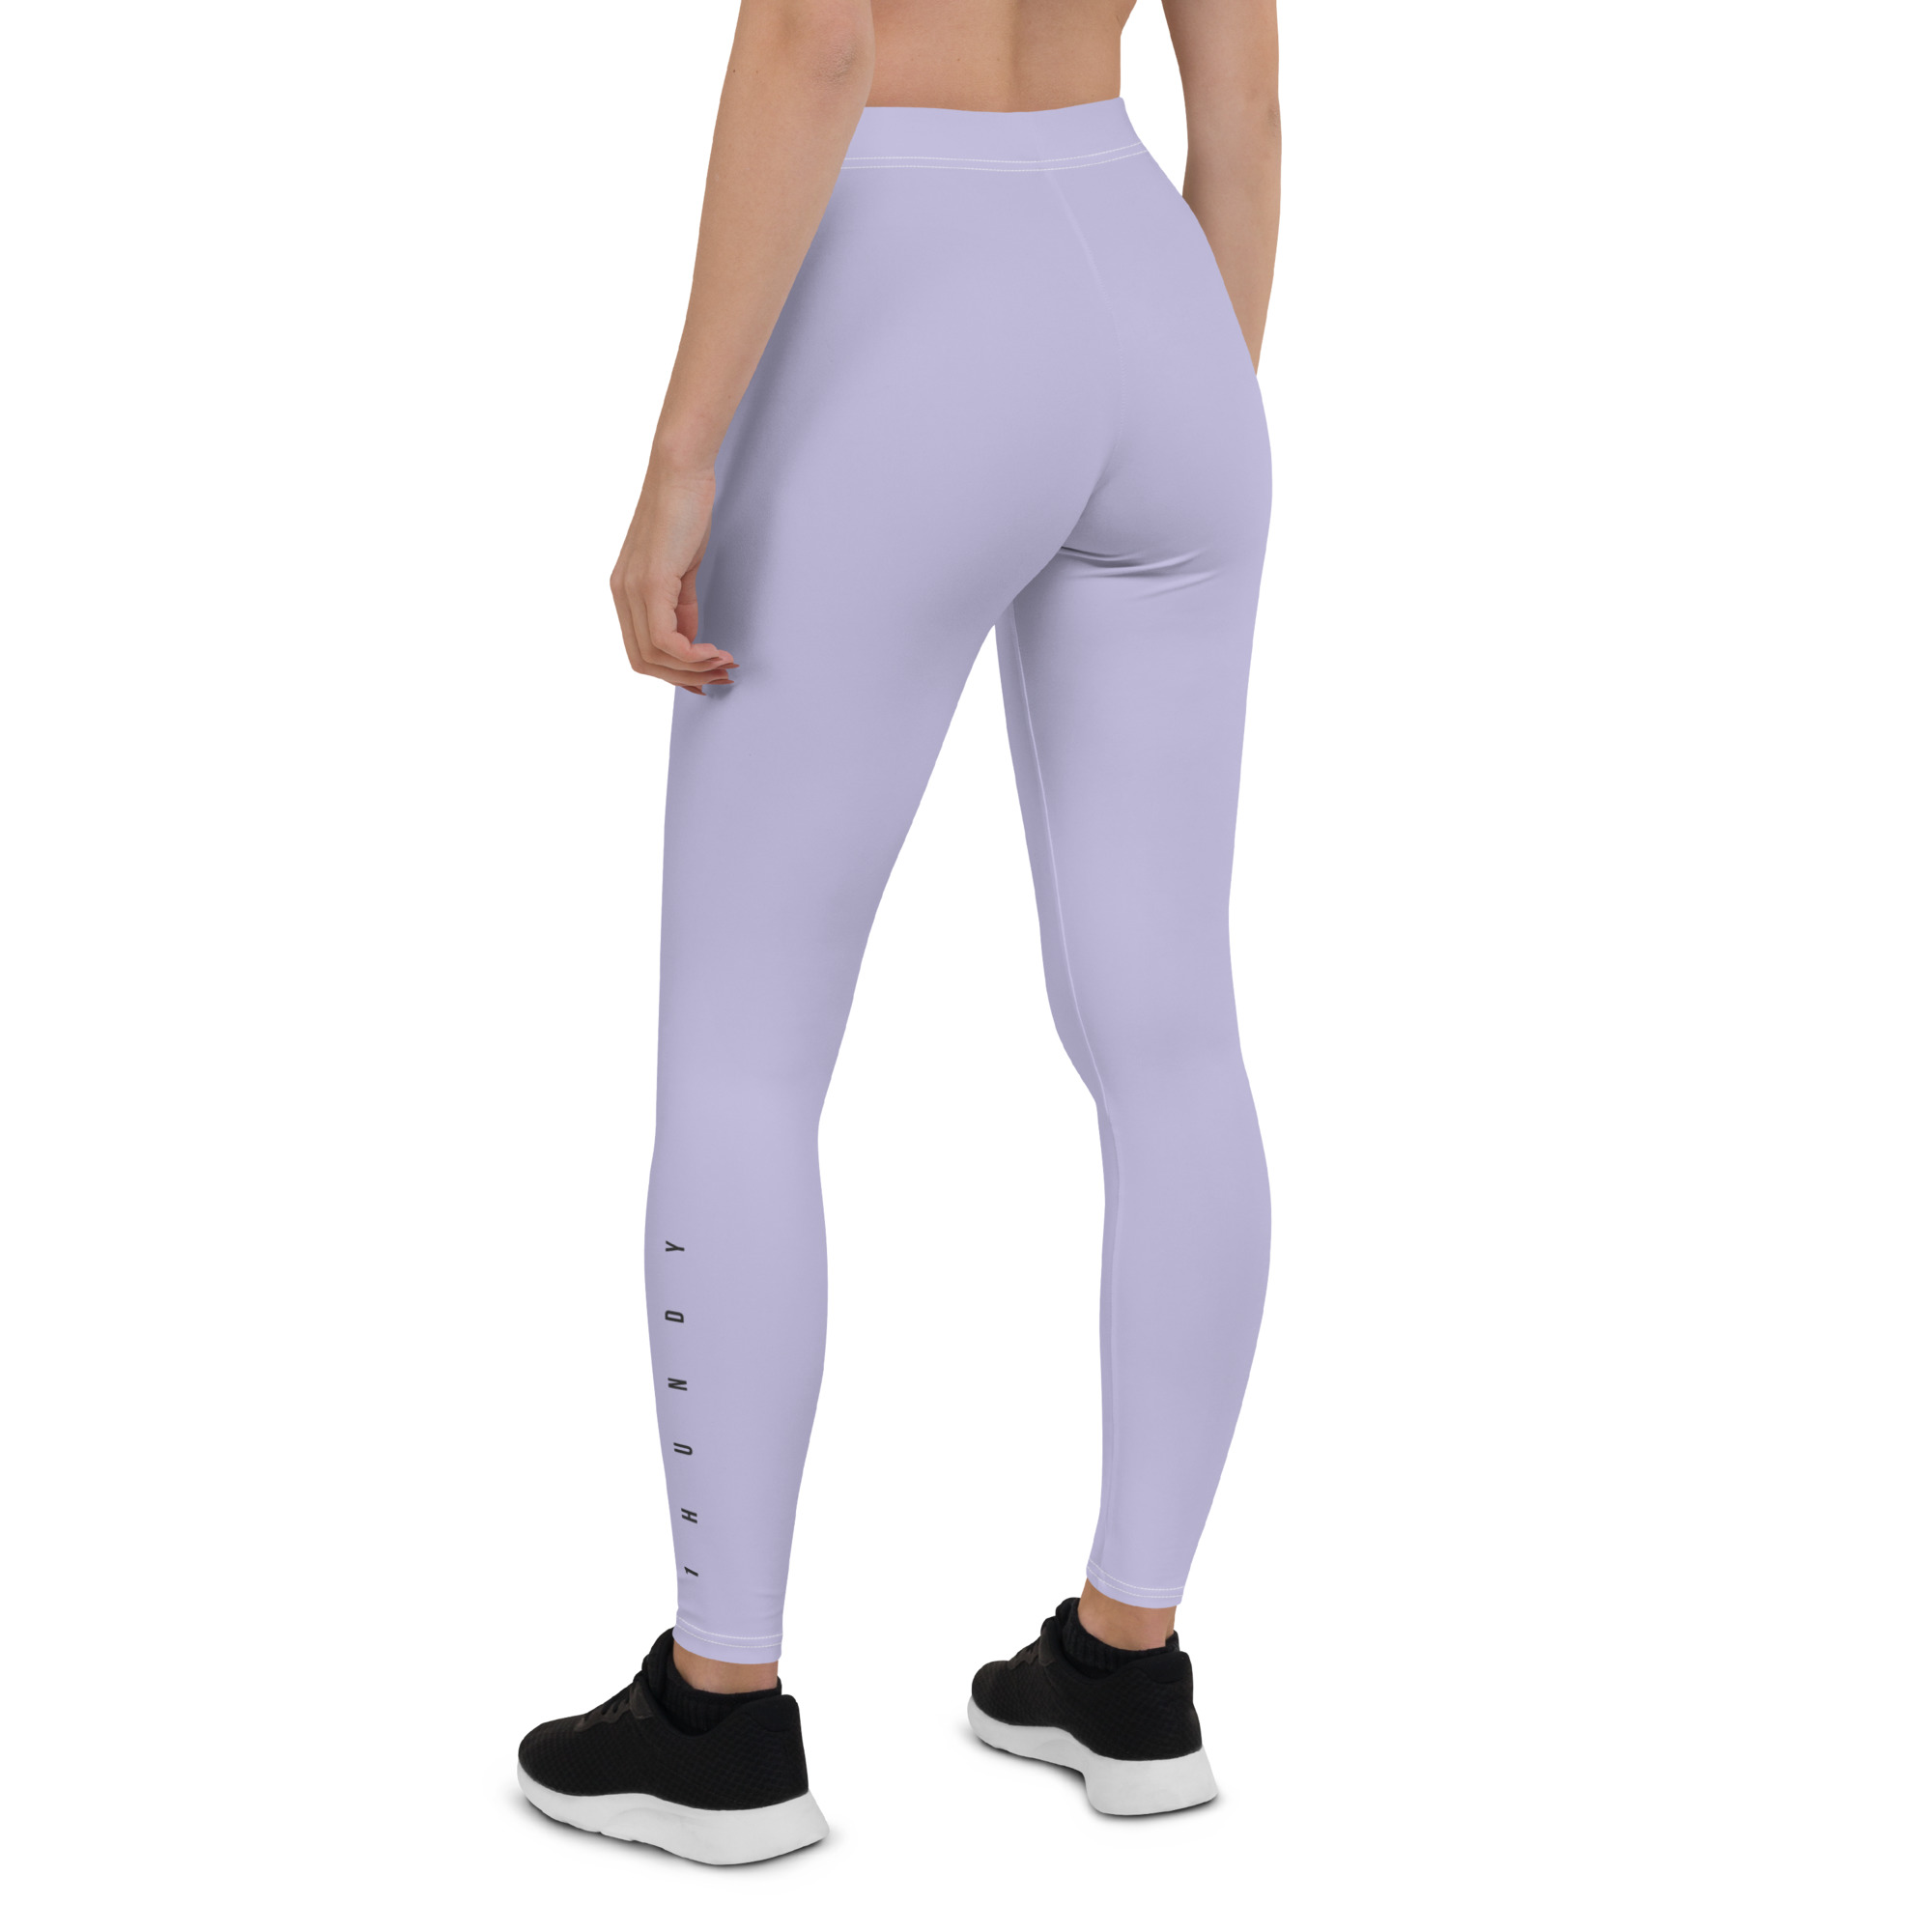 Women's low waisted leggings by 1HUNDY